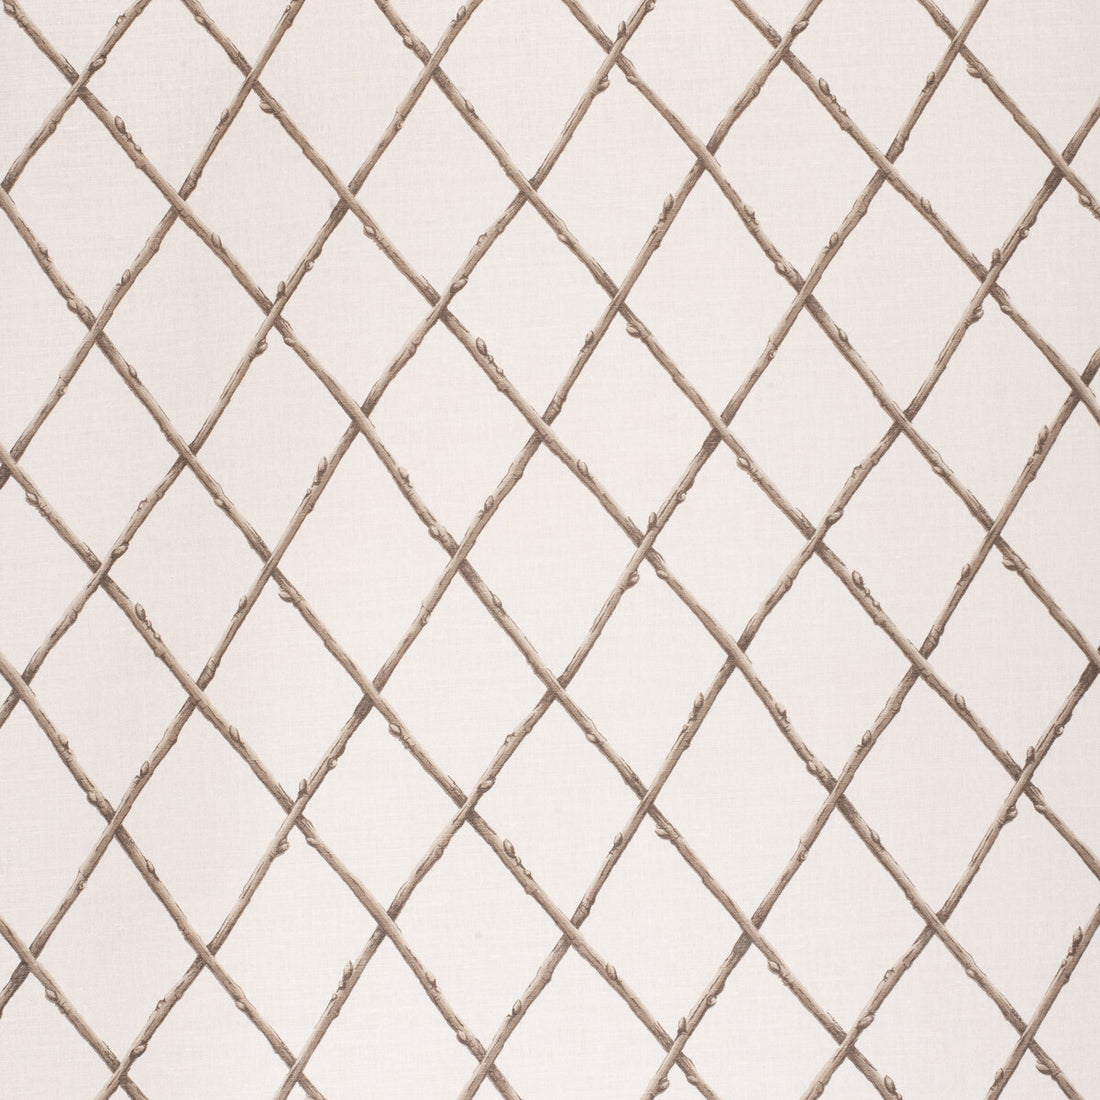 Bare Twig Trellis fabric in bro/ecr color - pattern 2020116.1166.0 - by Lee Jofa in the Paolo Moschino Fabrics collection